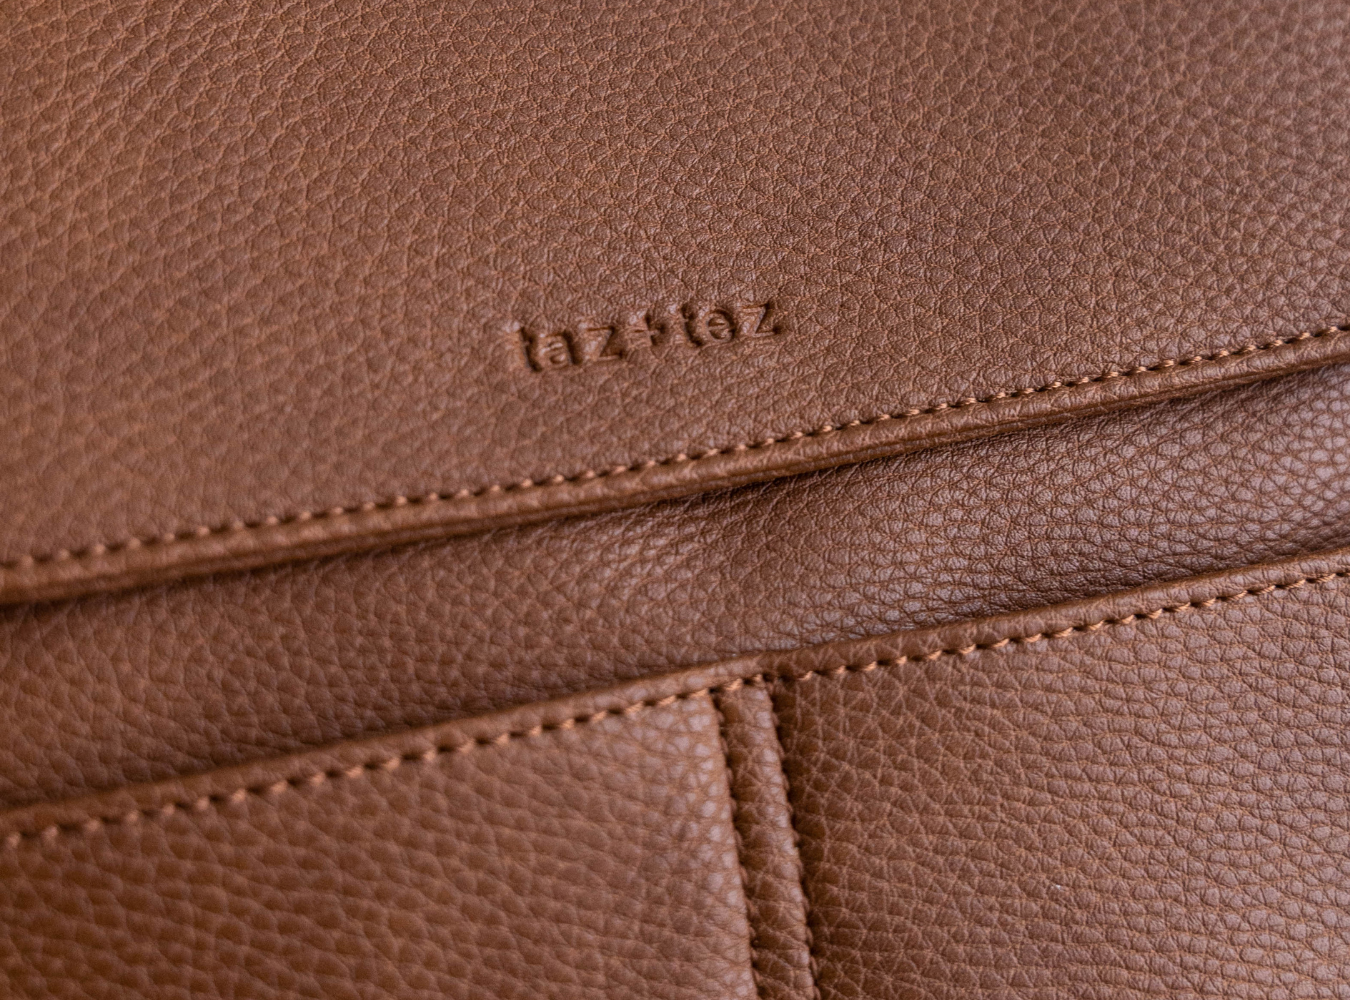 Why we use vegan leather for our camera bags